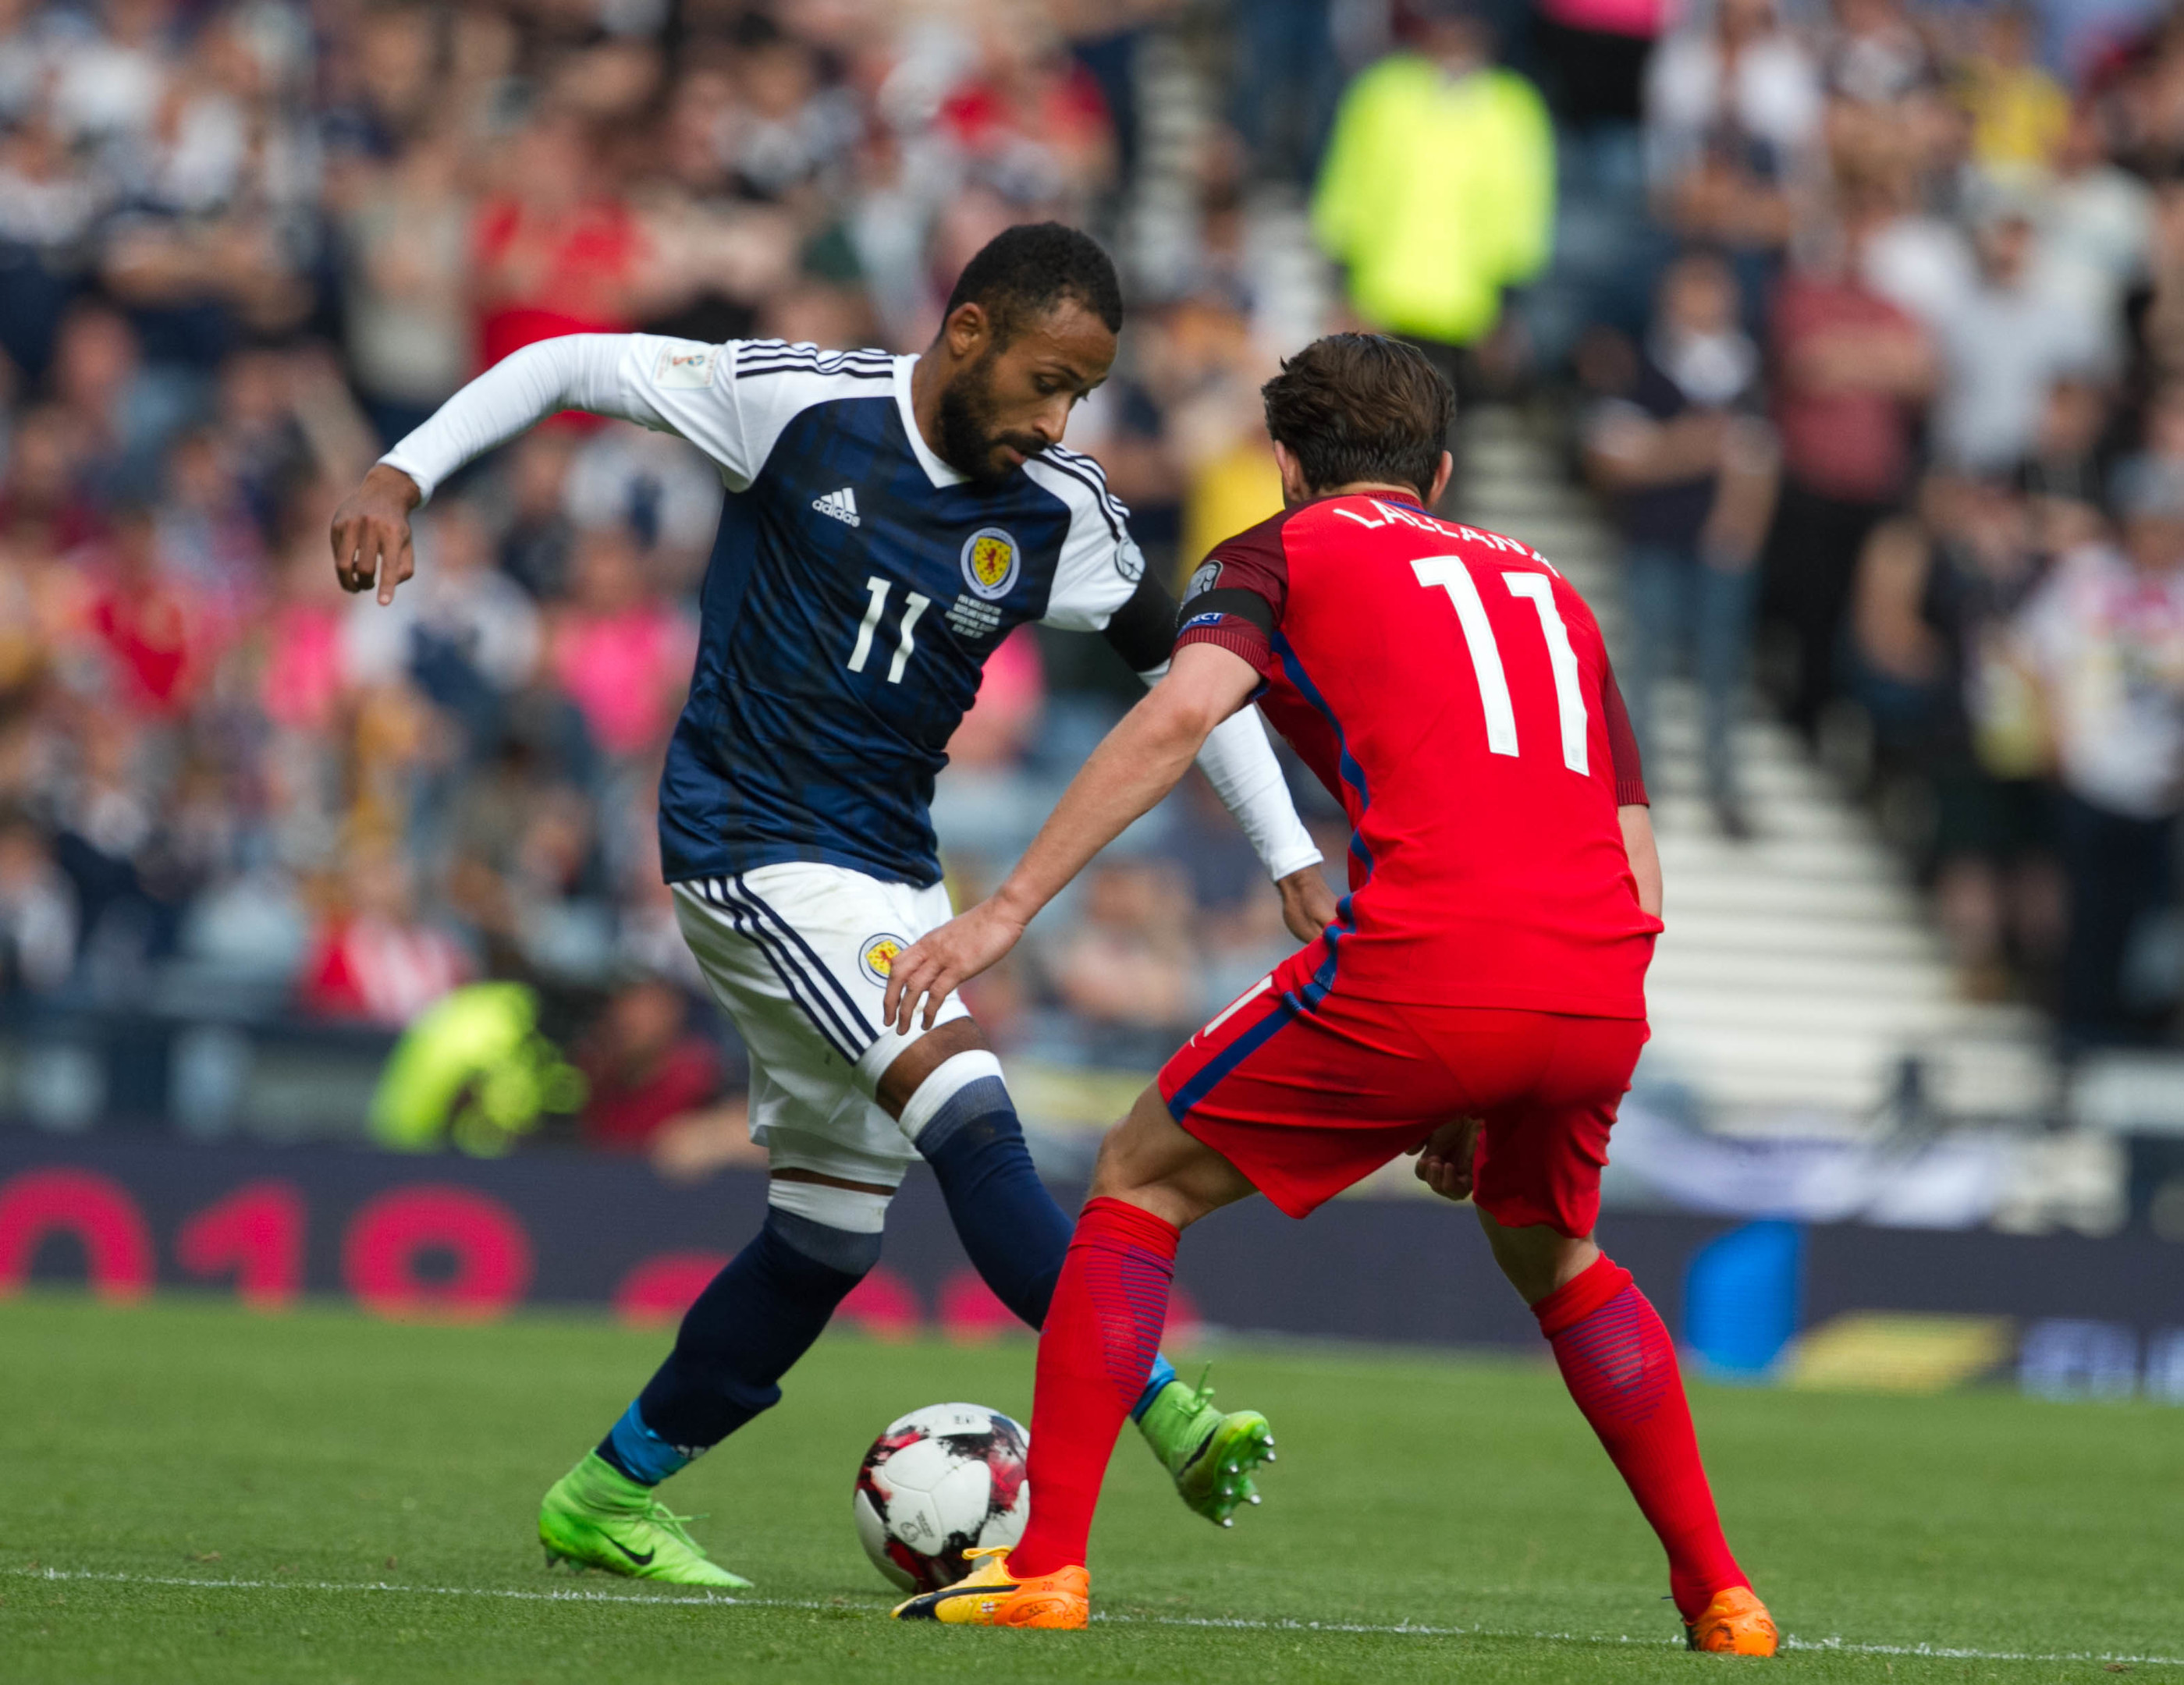 Ikechi Anya and Adam lallana during the 2018 World Cup Final qualifications at Hampden Park (iStock)